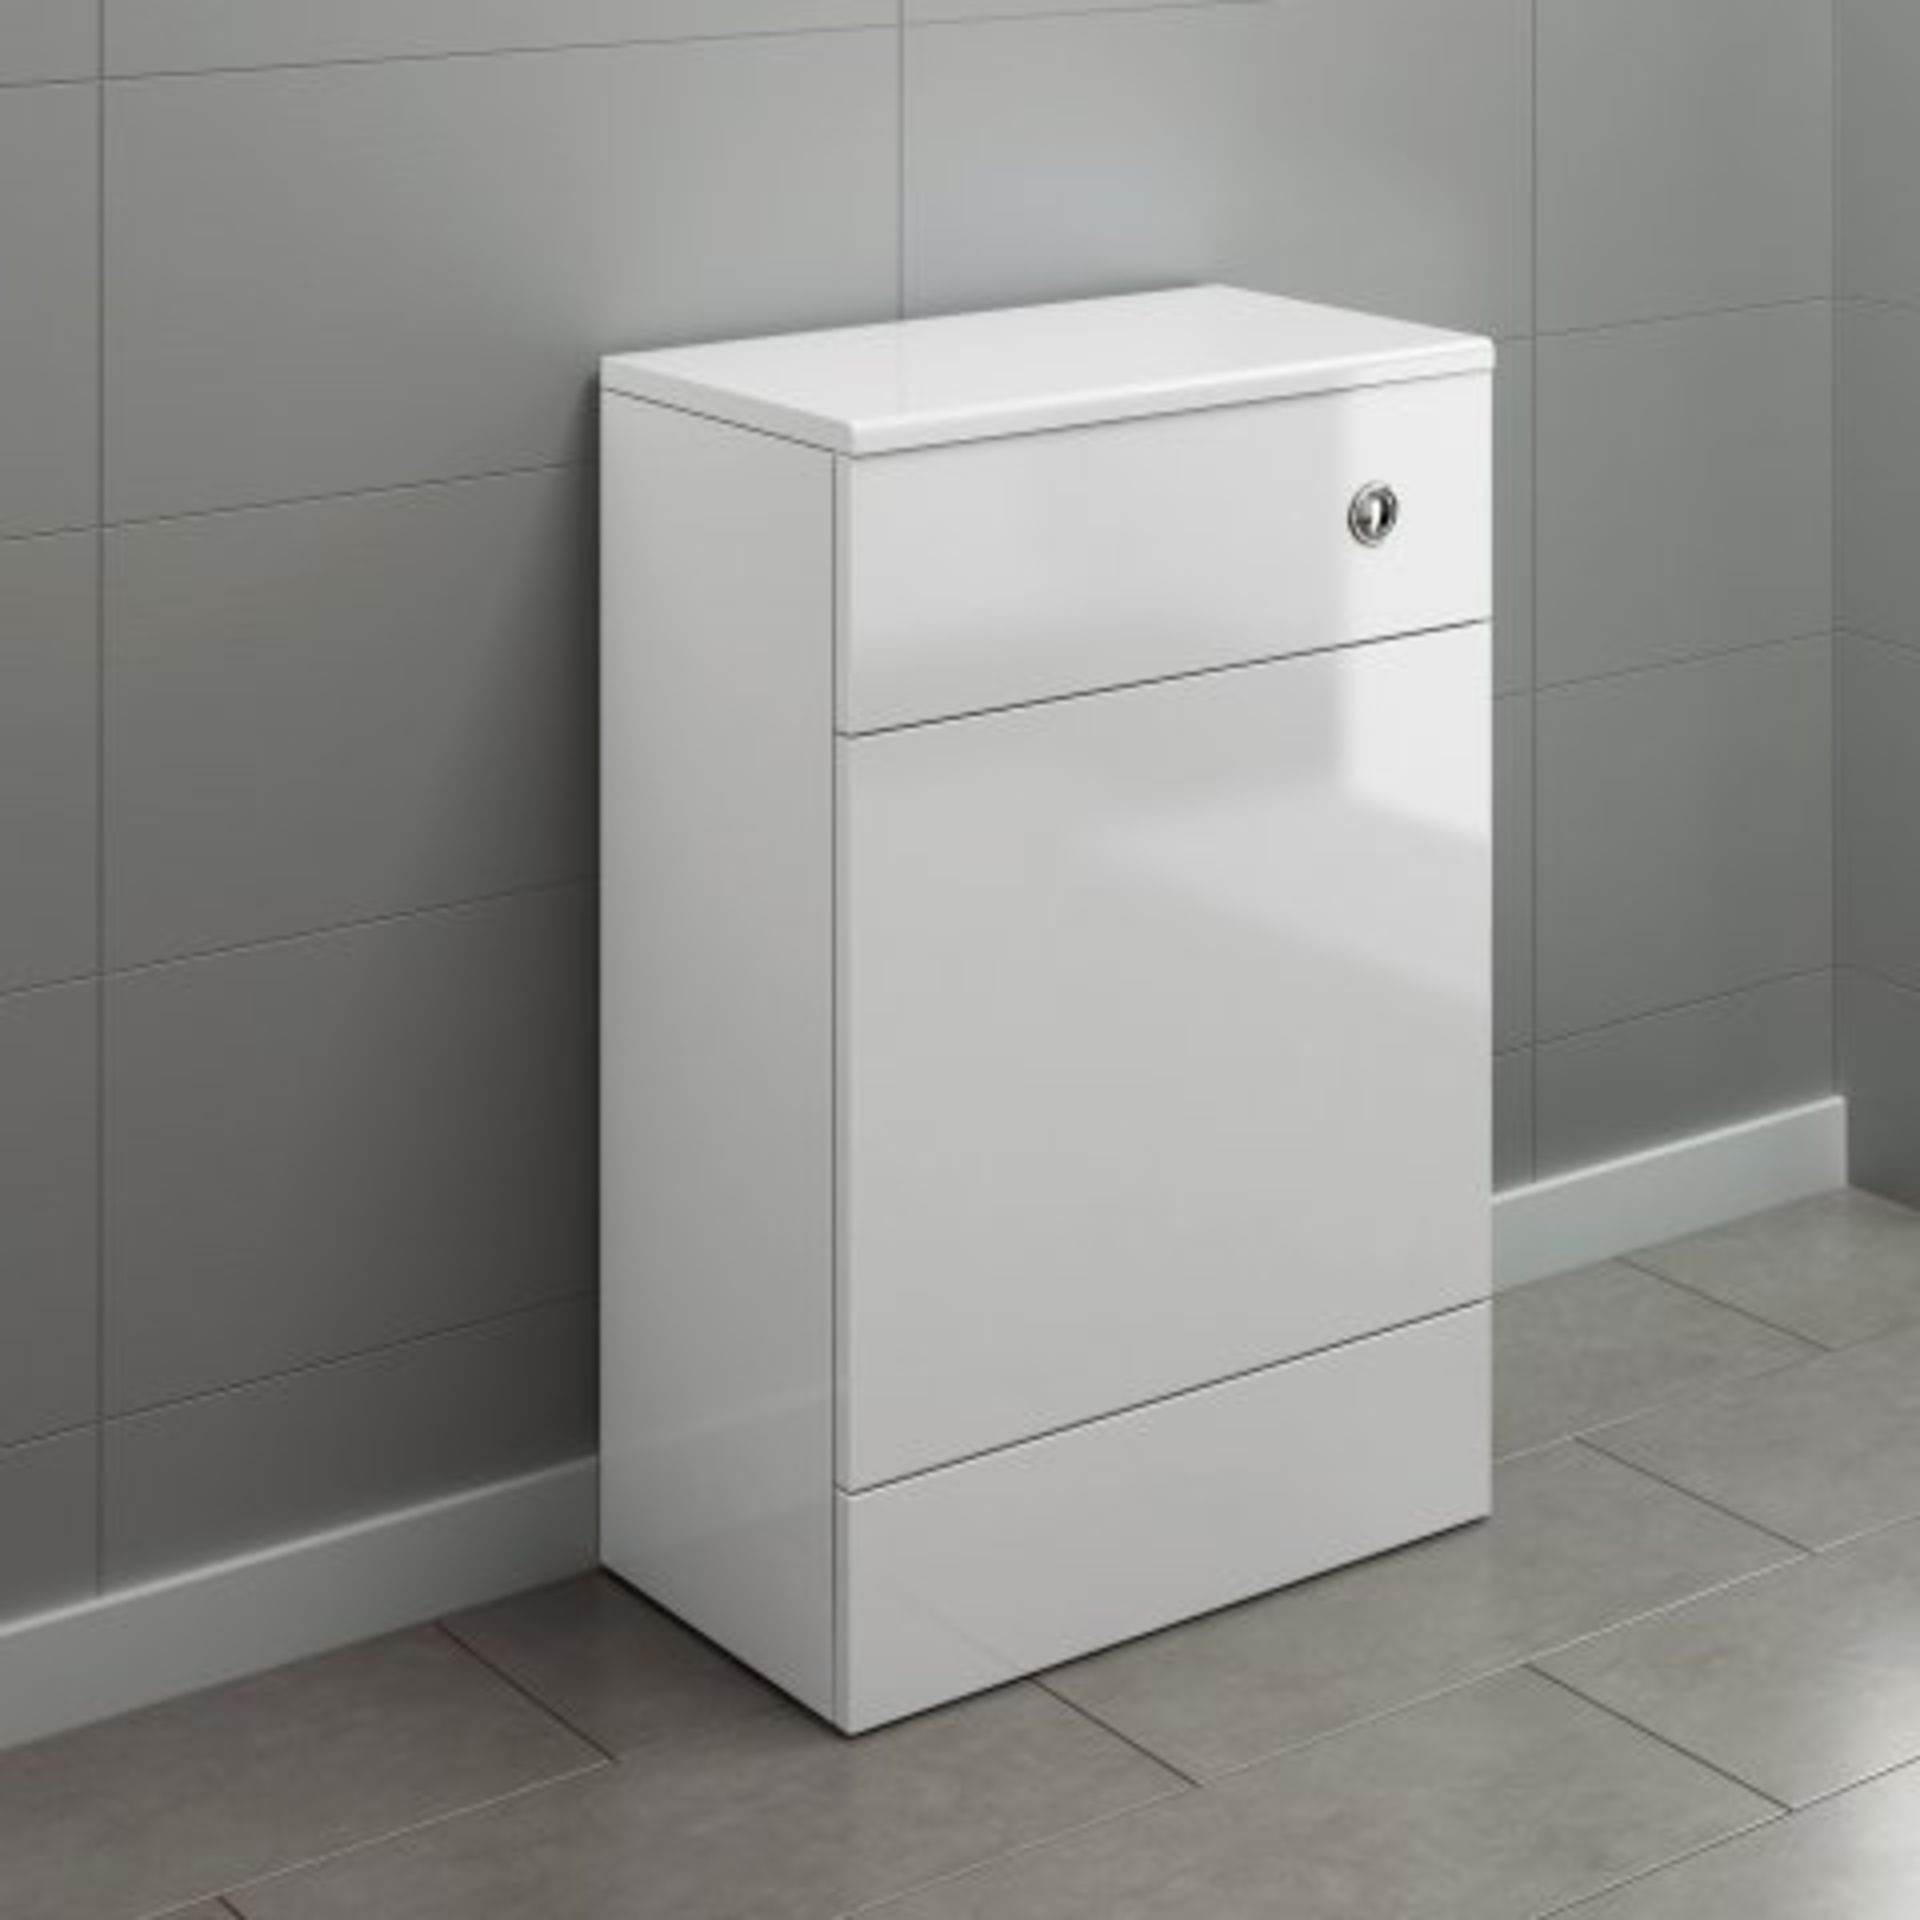 (AA18) 500mm Harper Gloss White Back To Wall Toilet Unit. RRP £174.99. This practical Harper Gloss